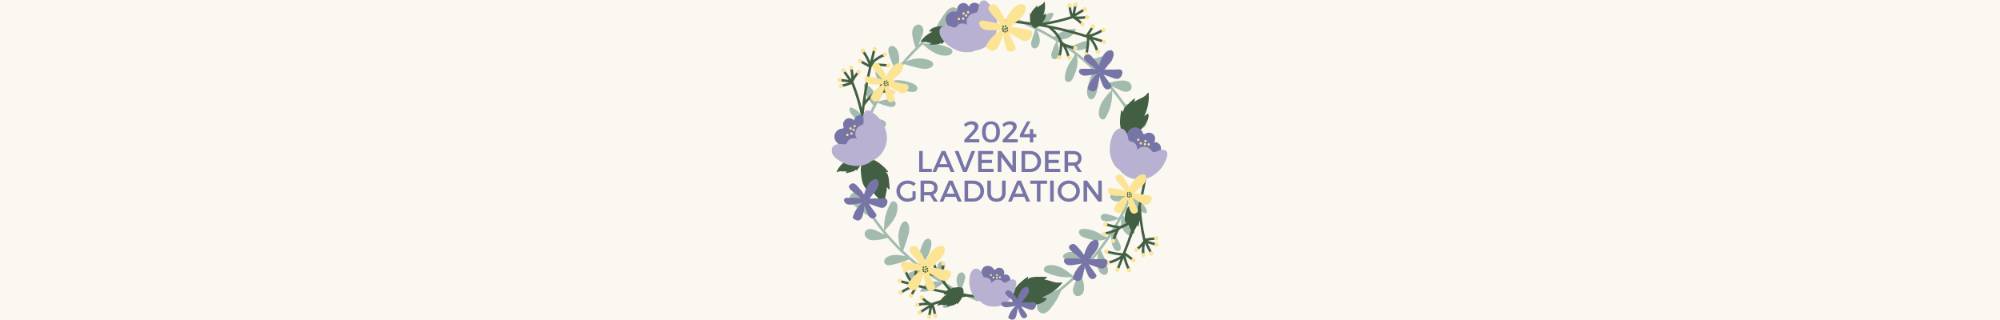 a lavender wreath surrounding the text reading 2024 Lavender Graduation on a pale yellow background